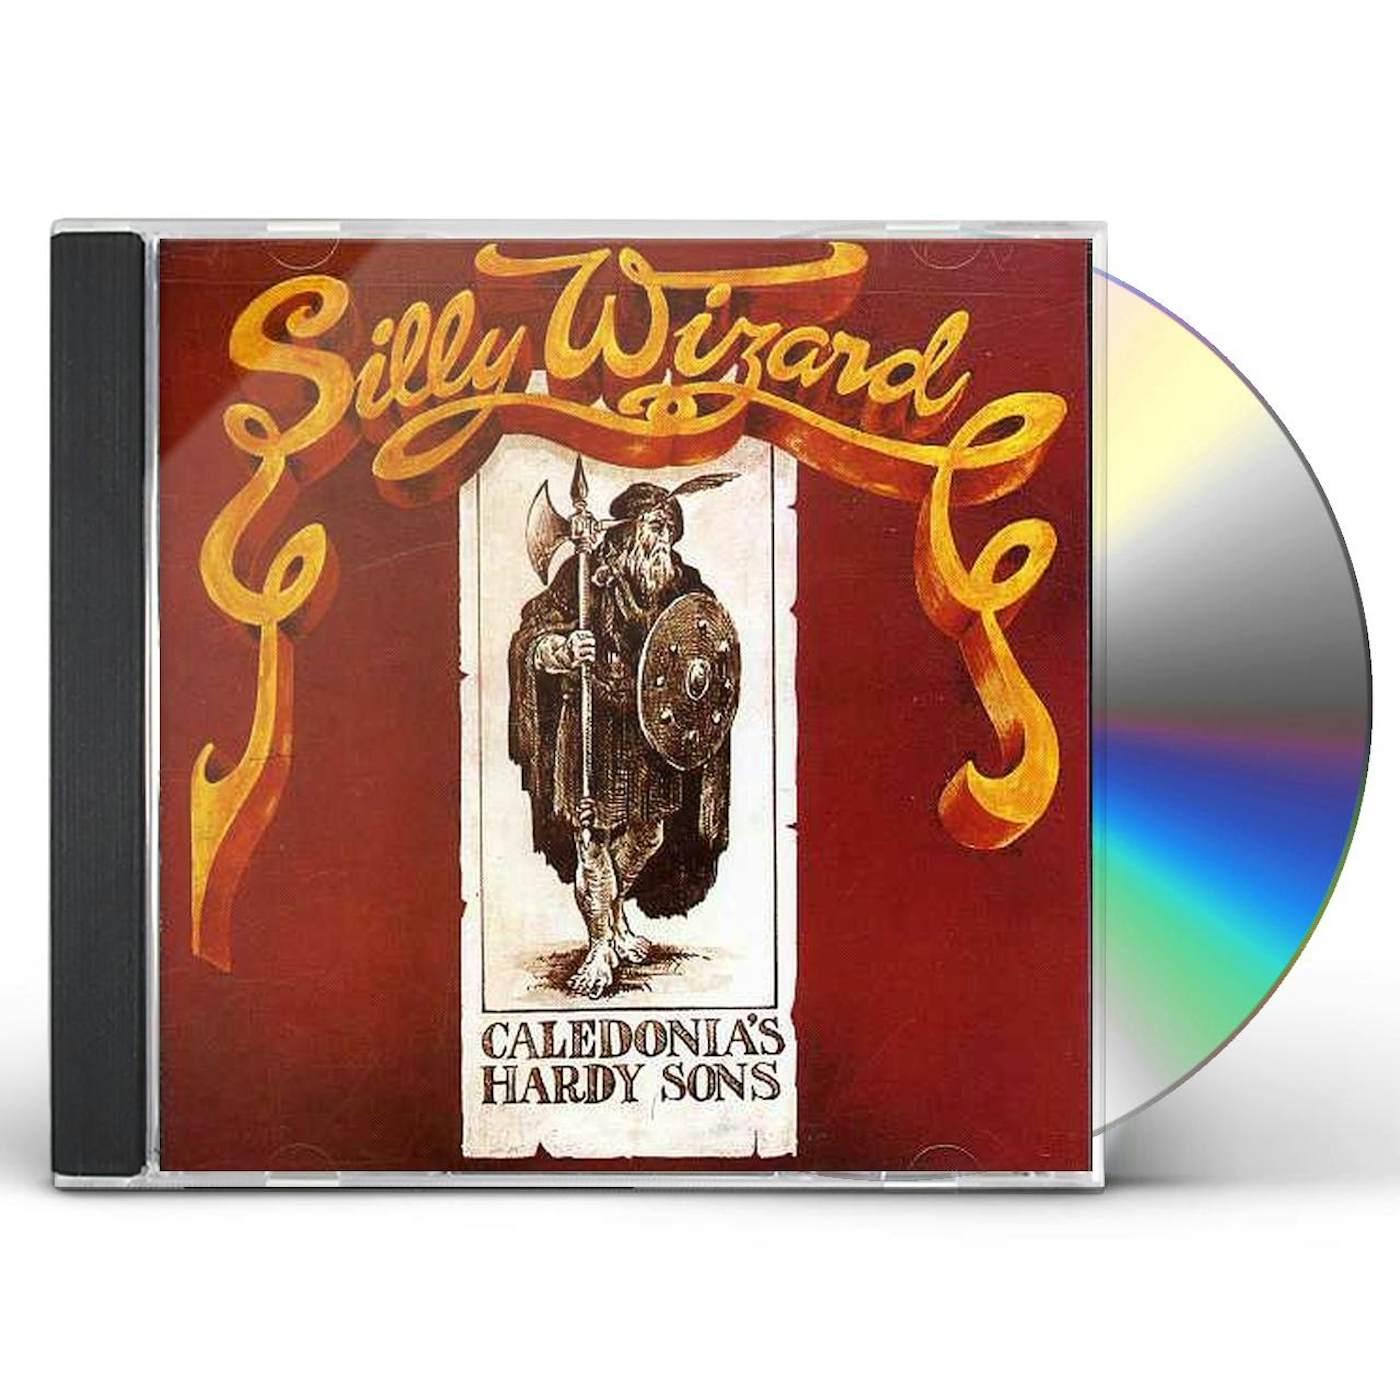 Silly Wizard CALEDONIAS HARDY SONS CD